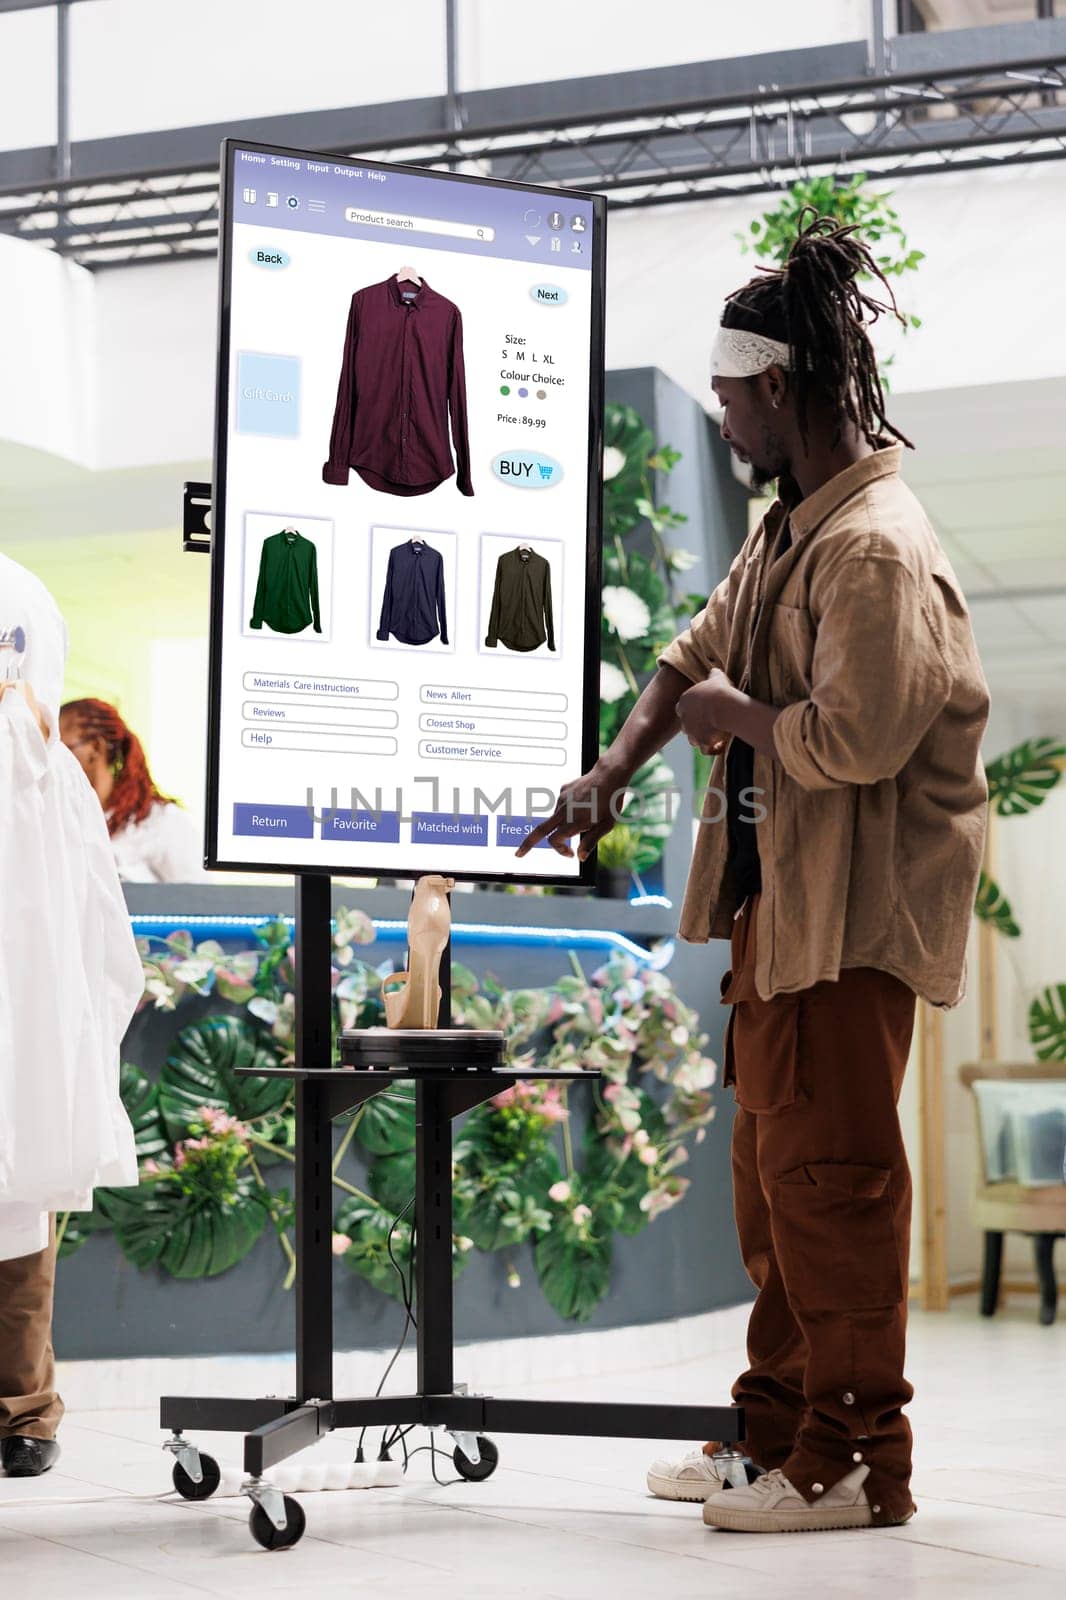 Shopper looks for clothes on monitor by DCStudio